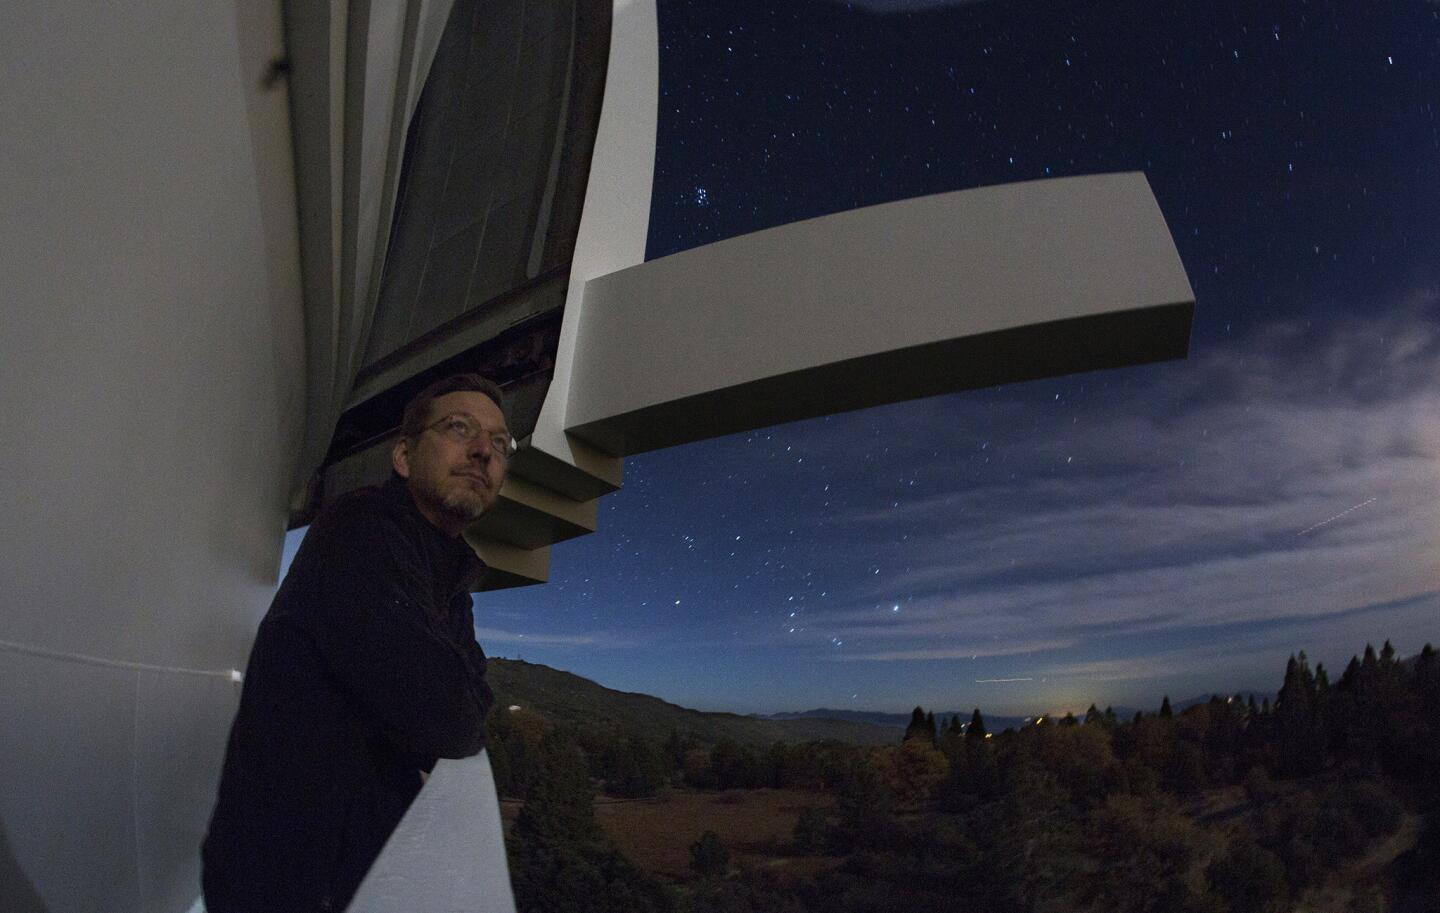 Astronomer Mike Brown